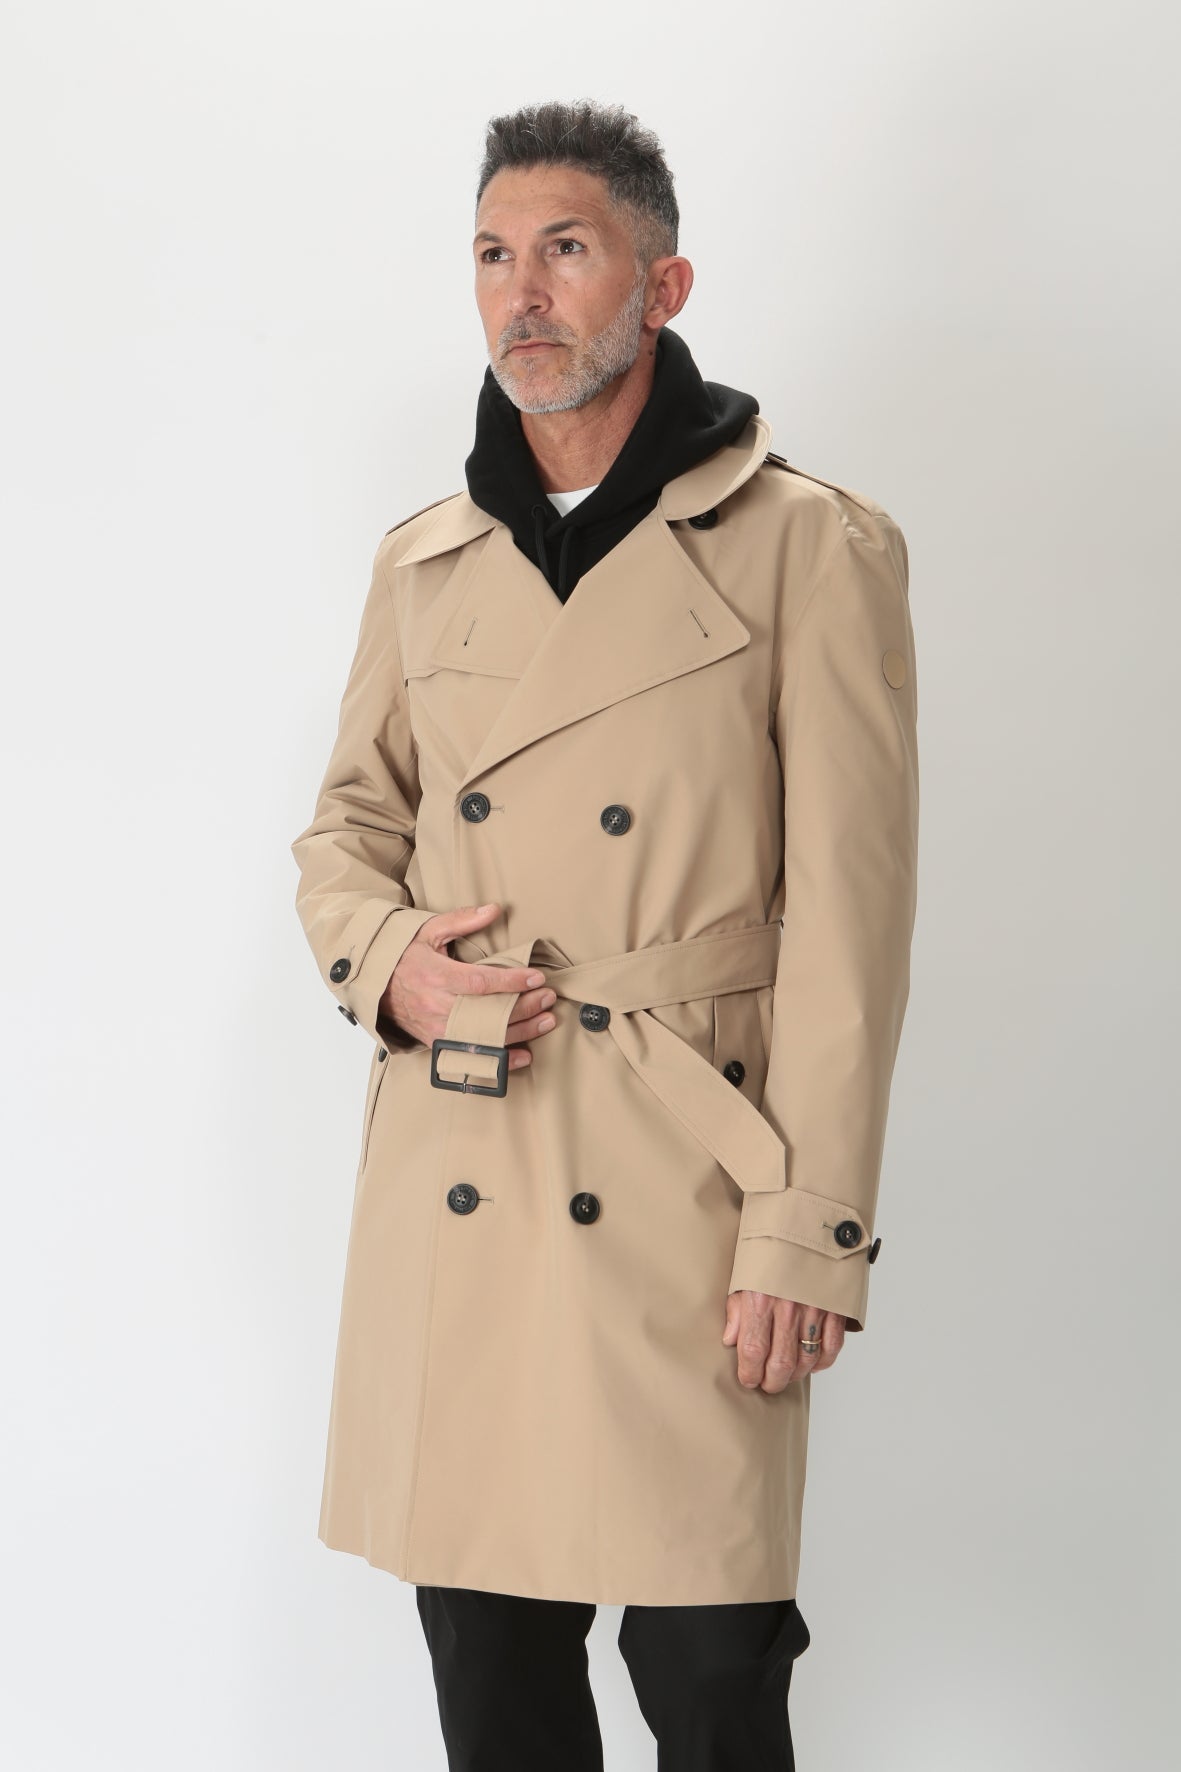 https://admin.shopify.com/store/gulieshop/products/9044483539293#:~:text=Invia-,Save%20the%20duck%20Trench%20in%20tessuto%20tecnico%20D41585M%20Grin18,-Contenuto%20multimediale%201